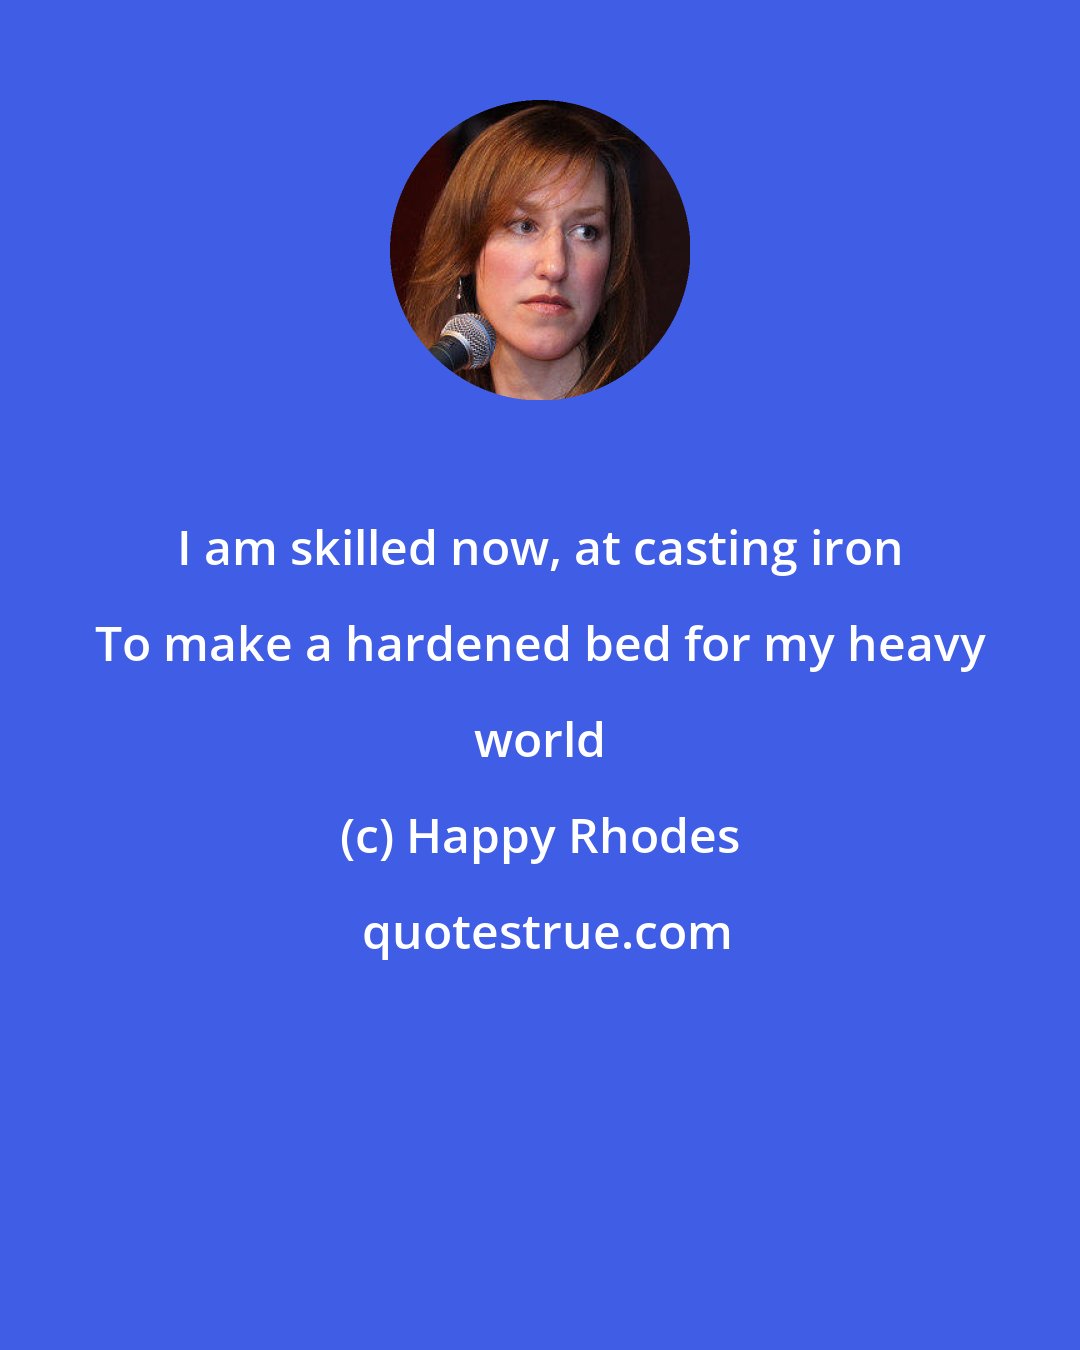 Happy Rhodes: I am skilled now, at casting iron To make a hardened bed for my heavy world